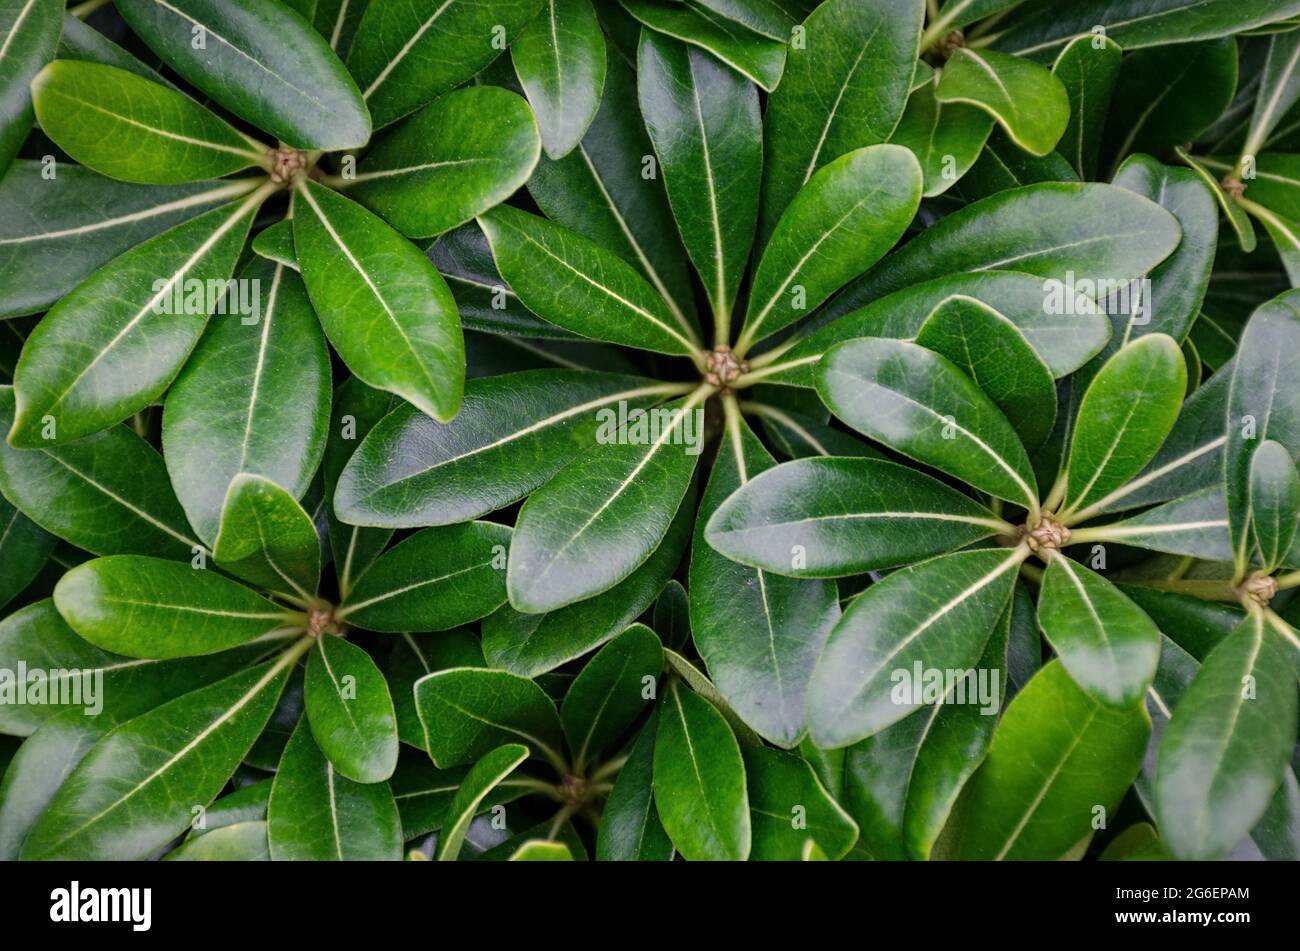 Shiny wet green leaves background. Top view tropical leaves wallpaper Stock Photo